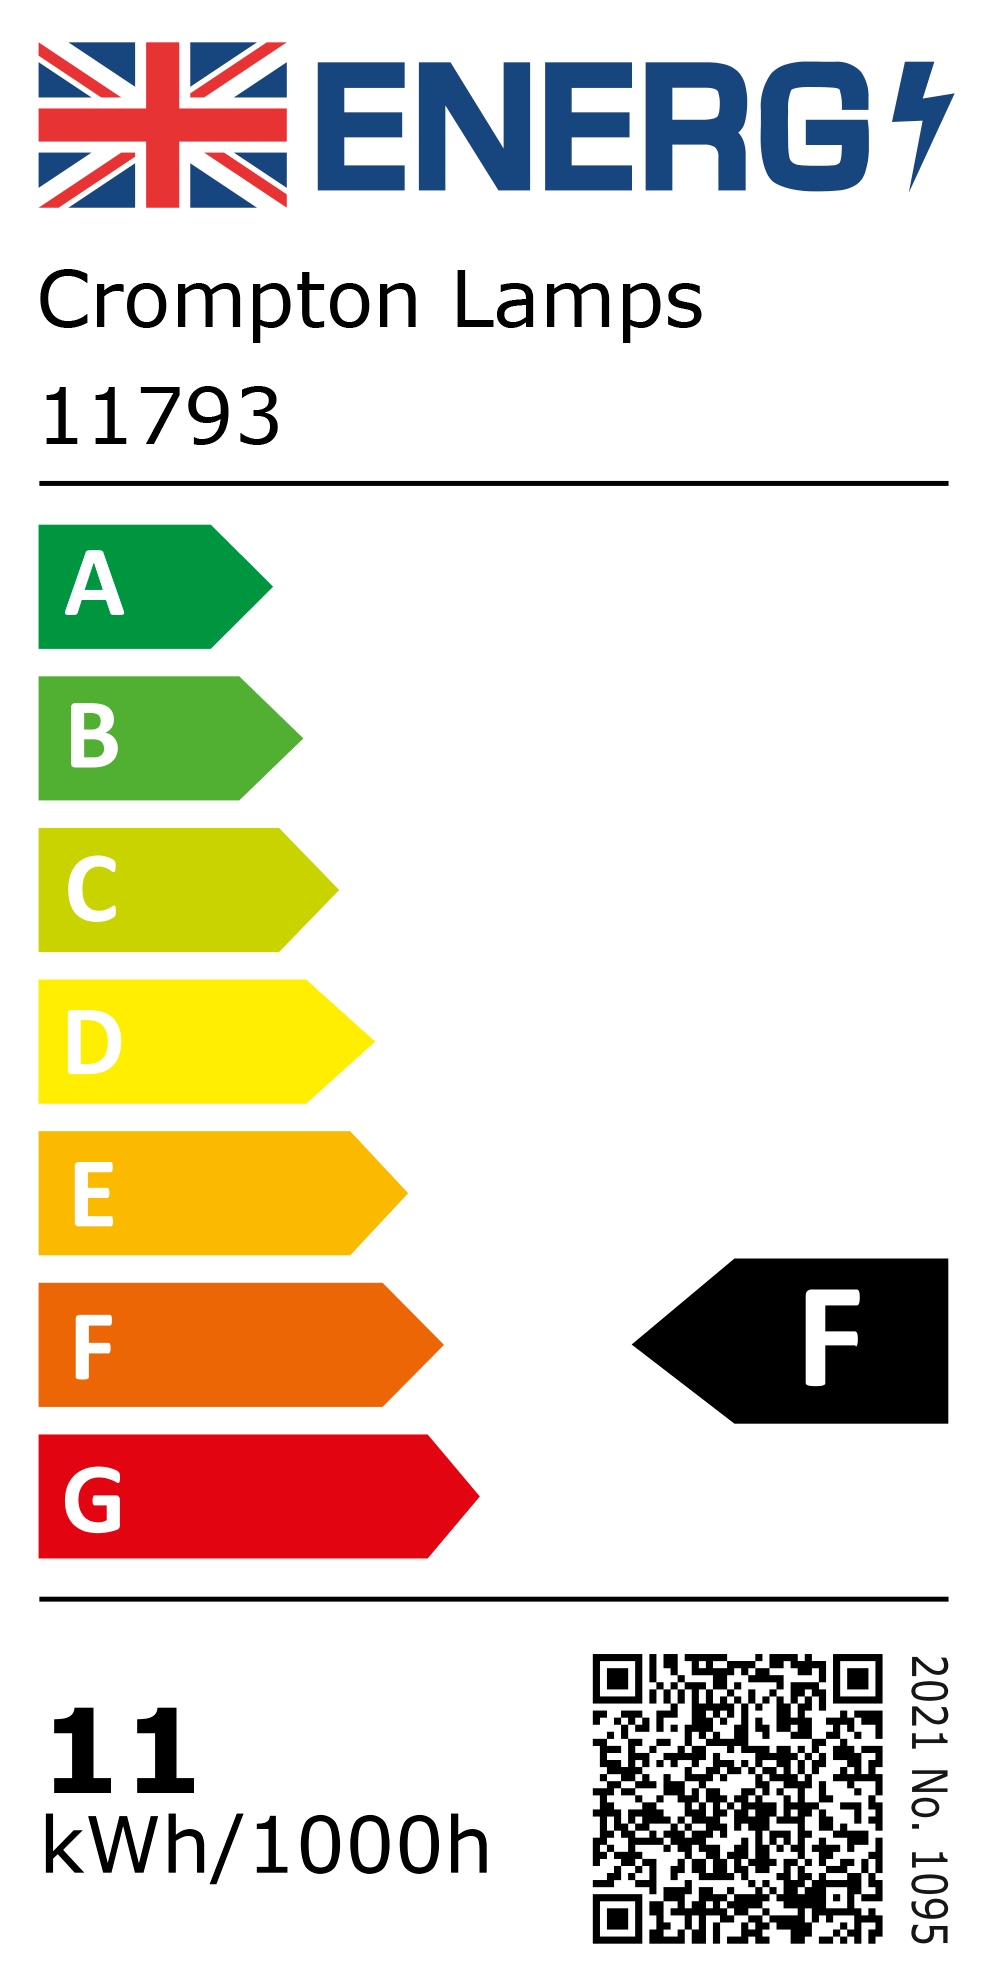 New 2021 Energy Rating Label: Stock Code 11793